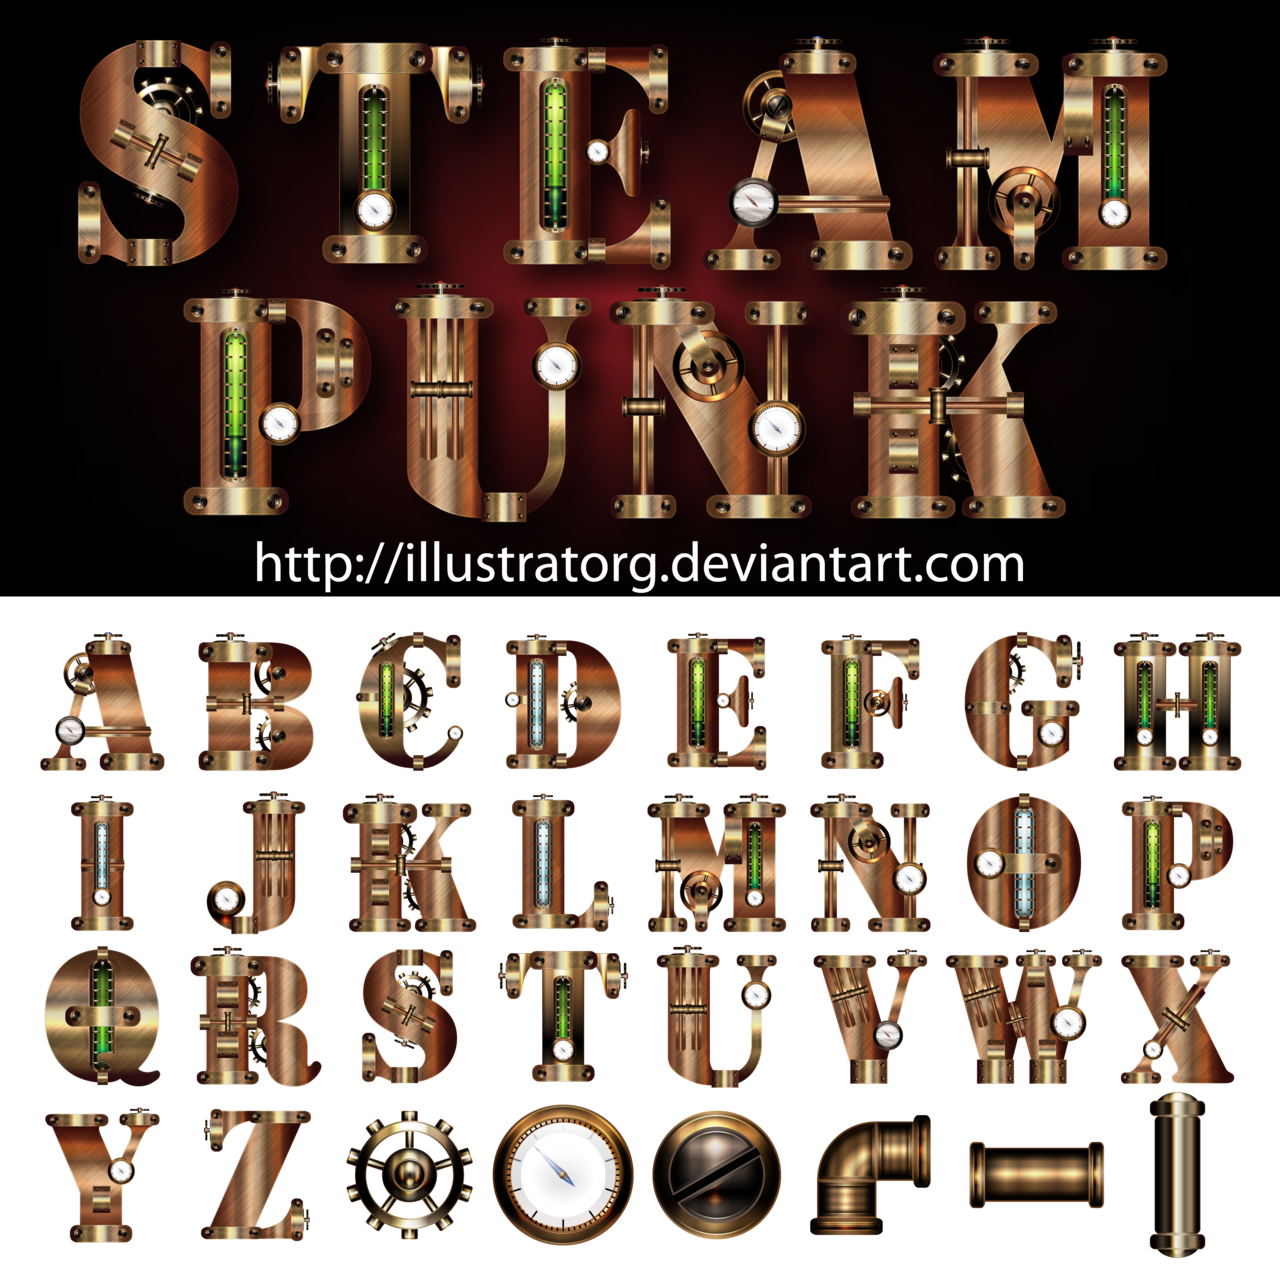 Font v by illustratorg. Steampunk clipart invention discovery